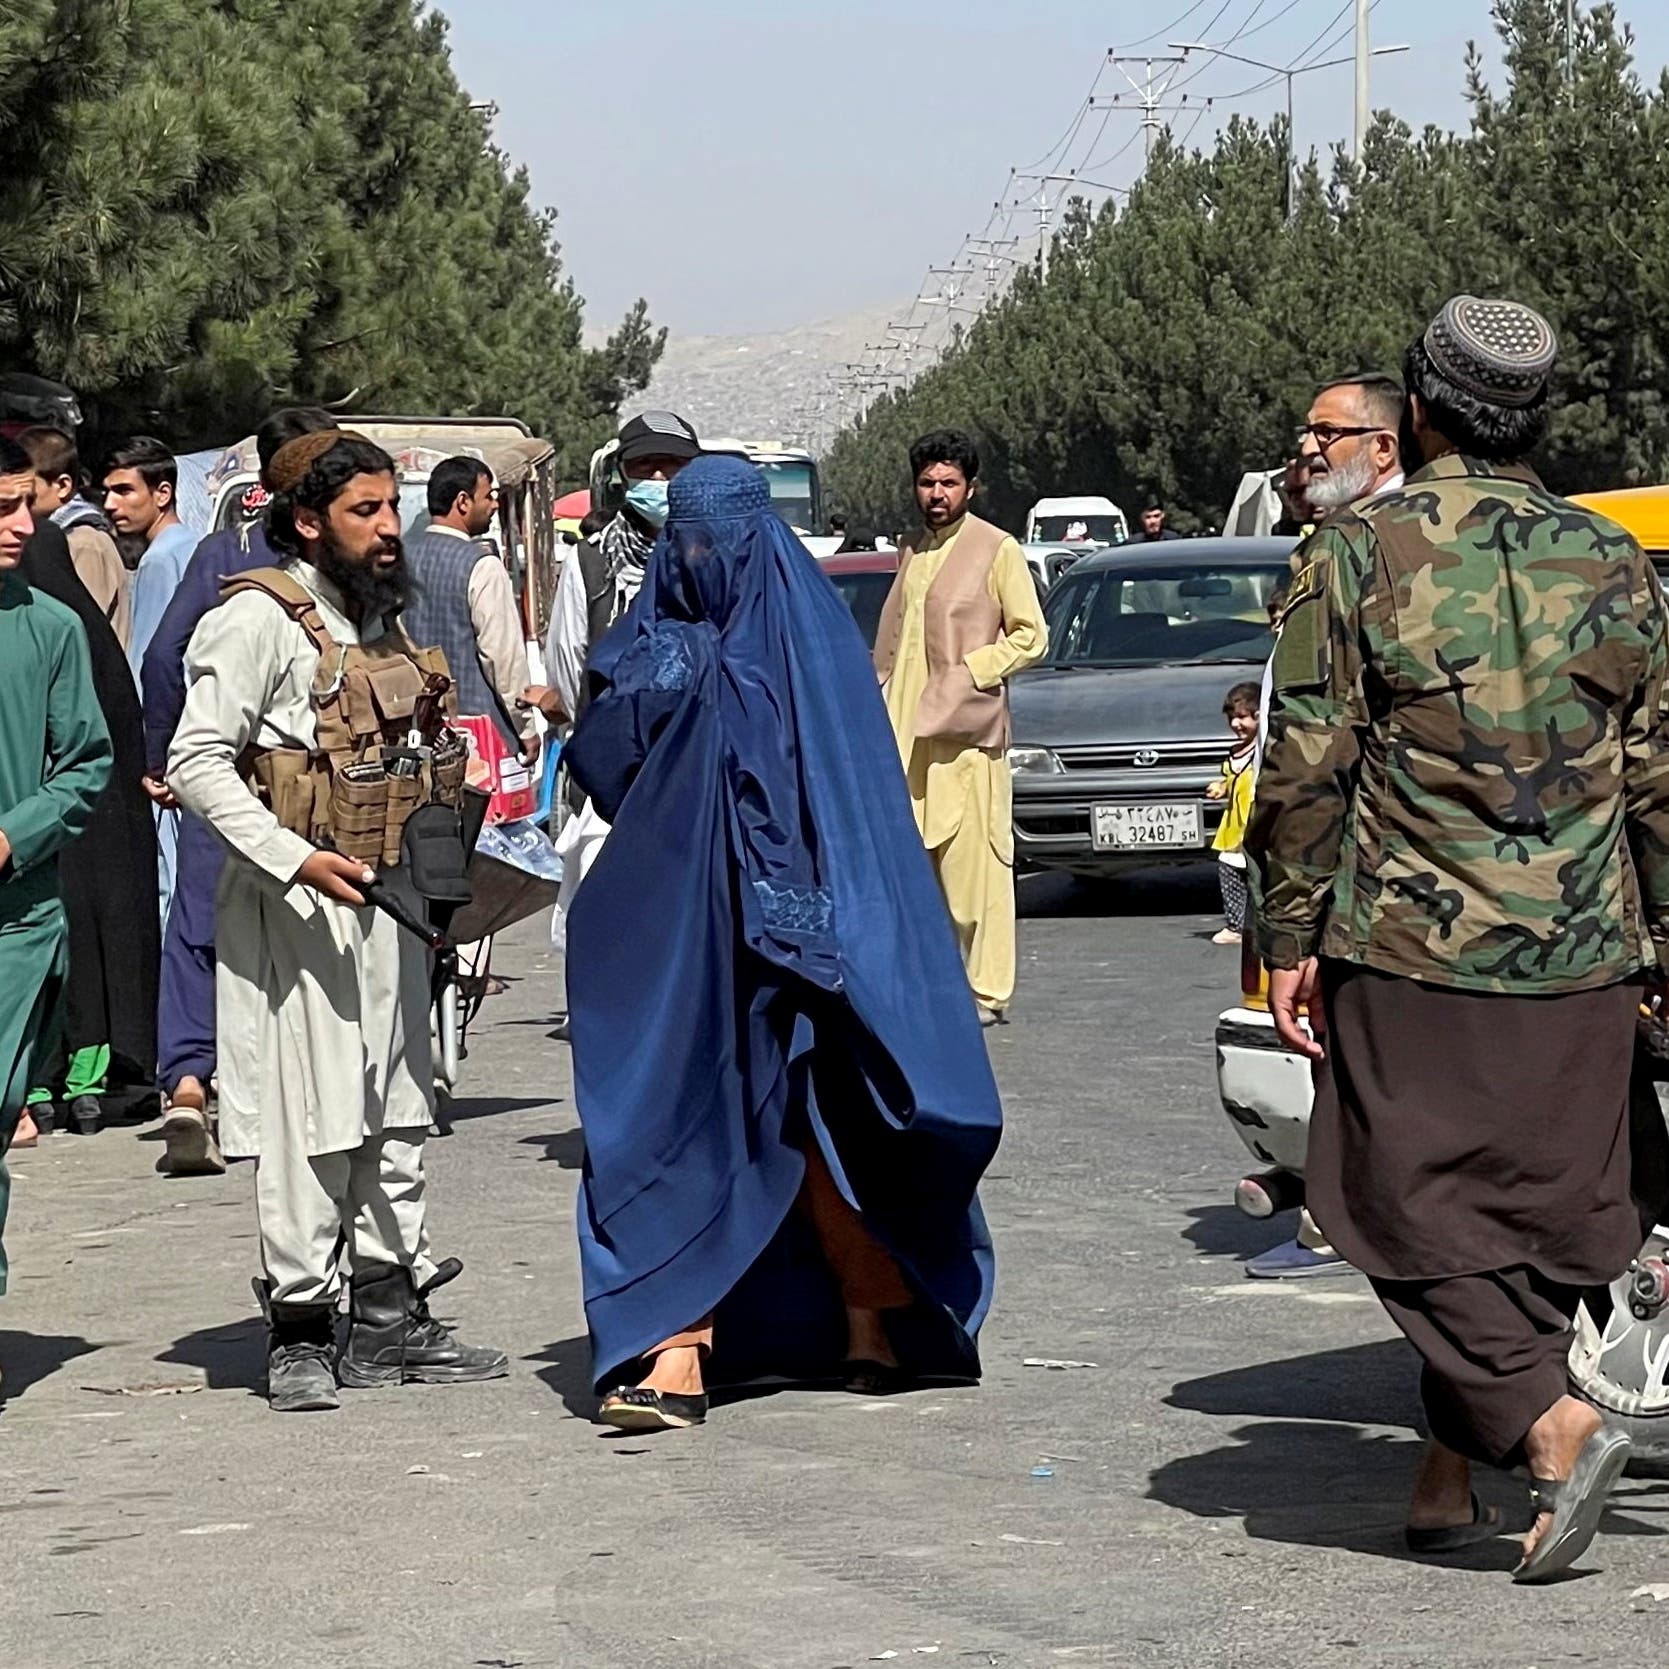 Taliban lies will build a generation of Afghan women becoming second-class citizens 